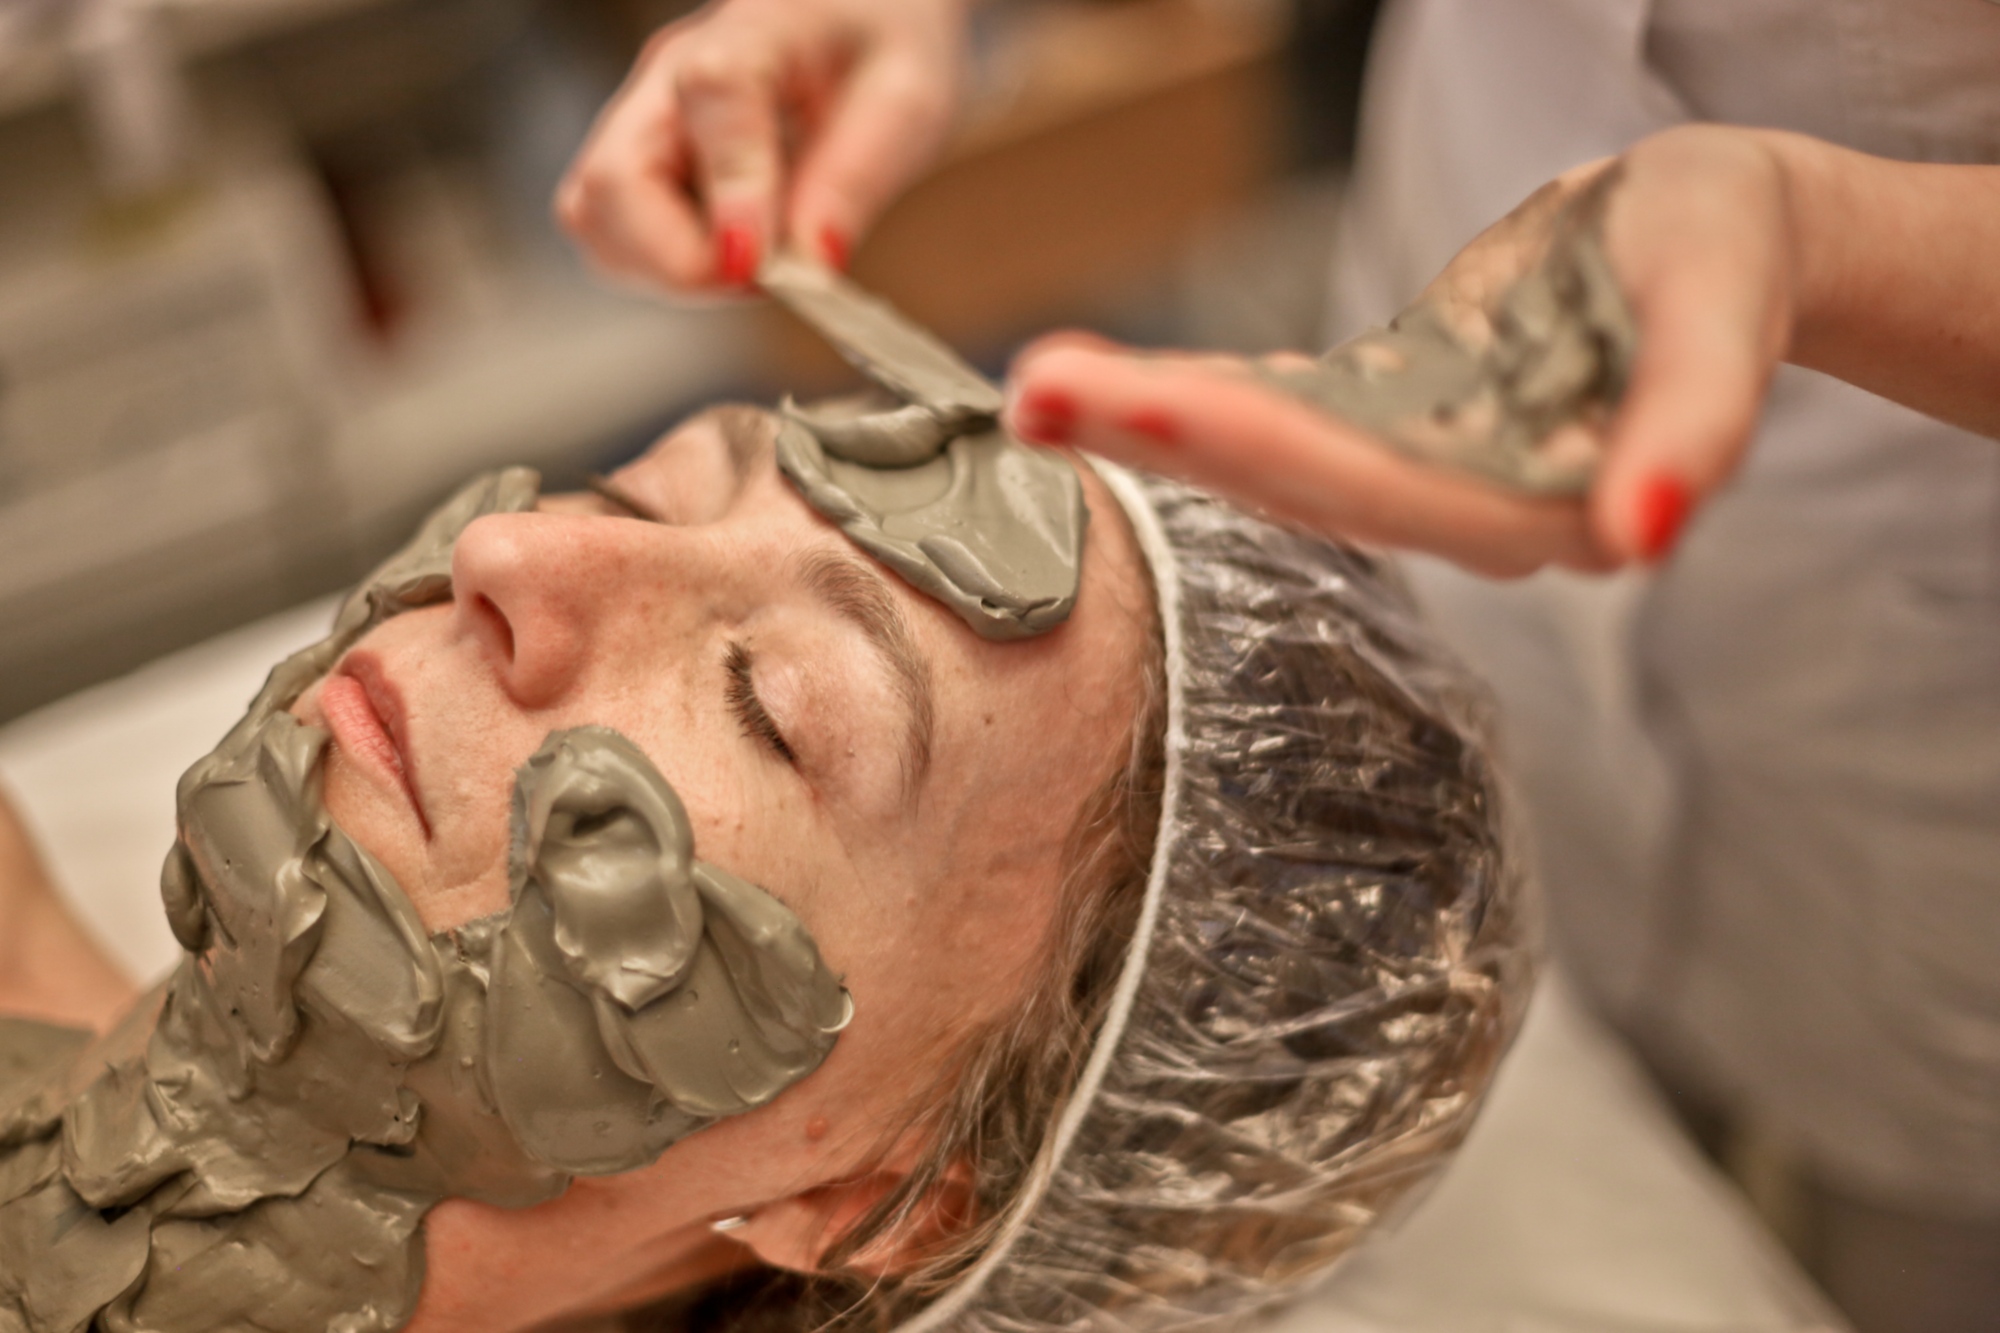 Beauty treatments at Terme Excelsior in Montecatini